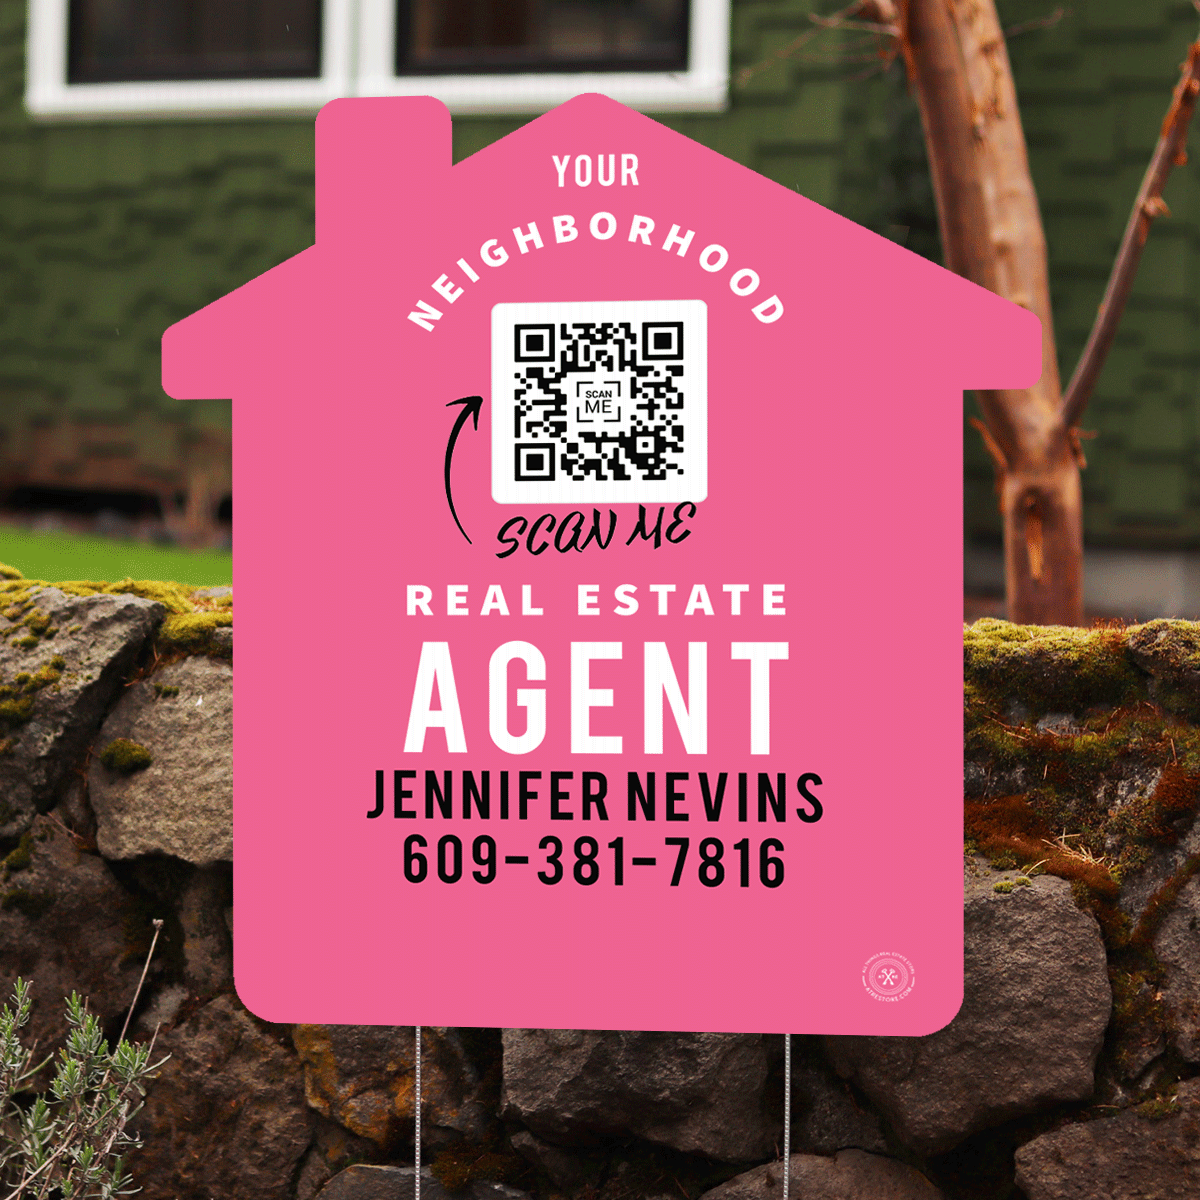 Personalized Neighborhood Agent House Shaped Sign